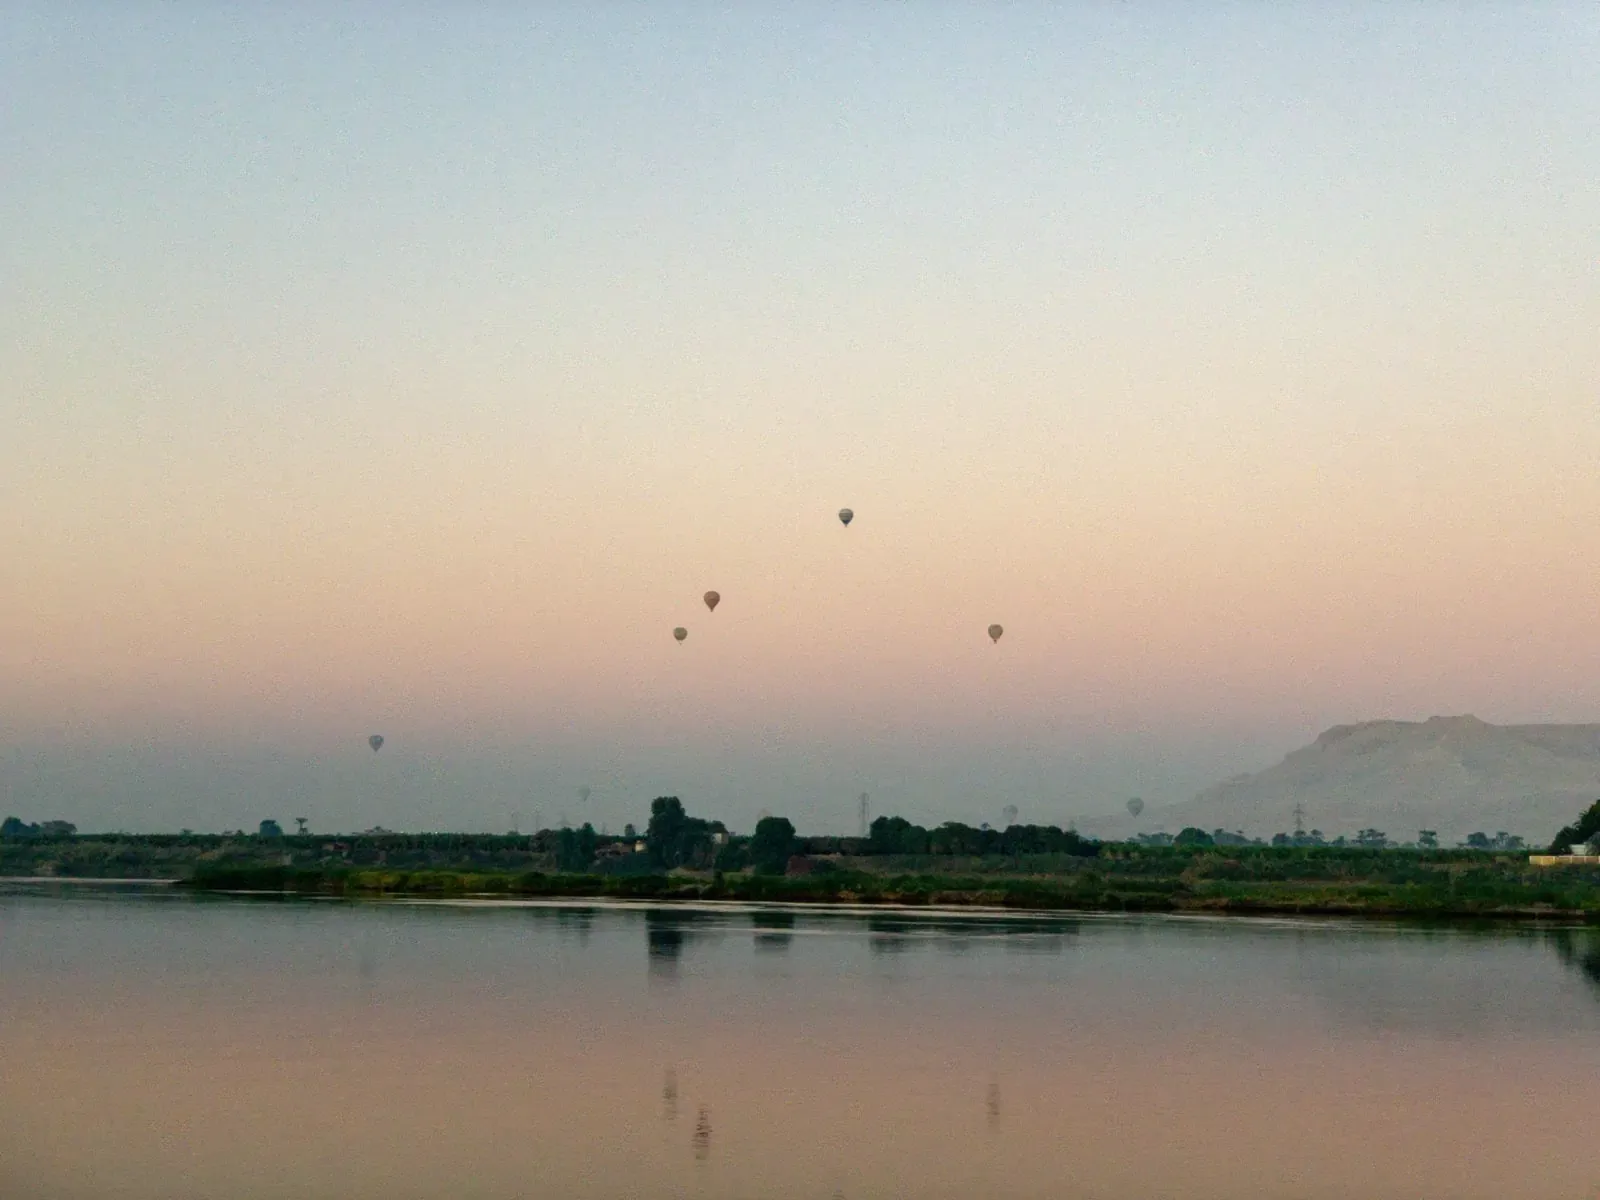 Hot Air Balloons over the Nile